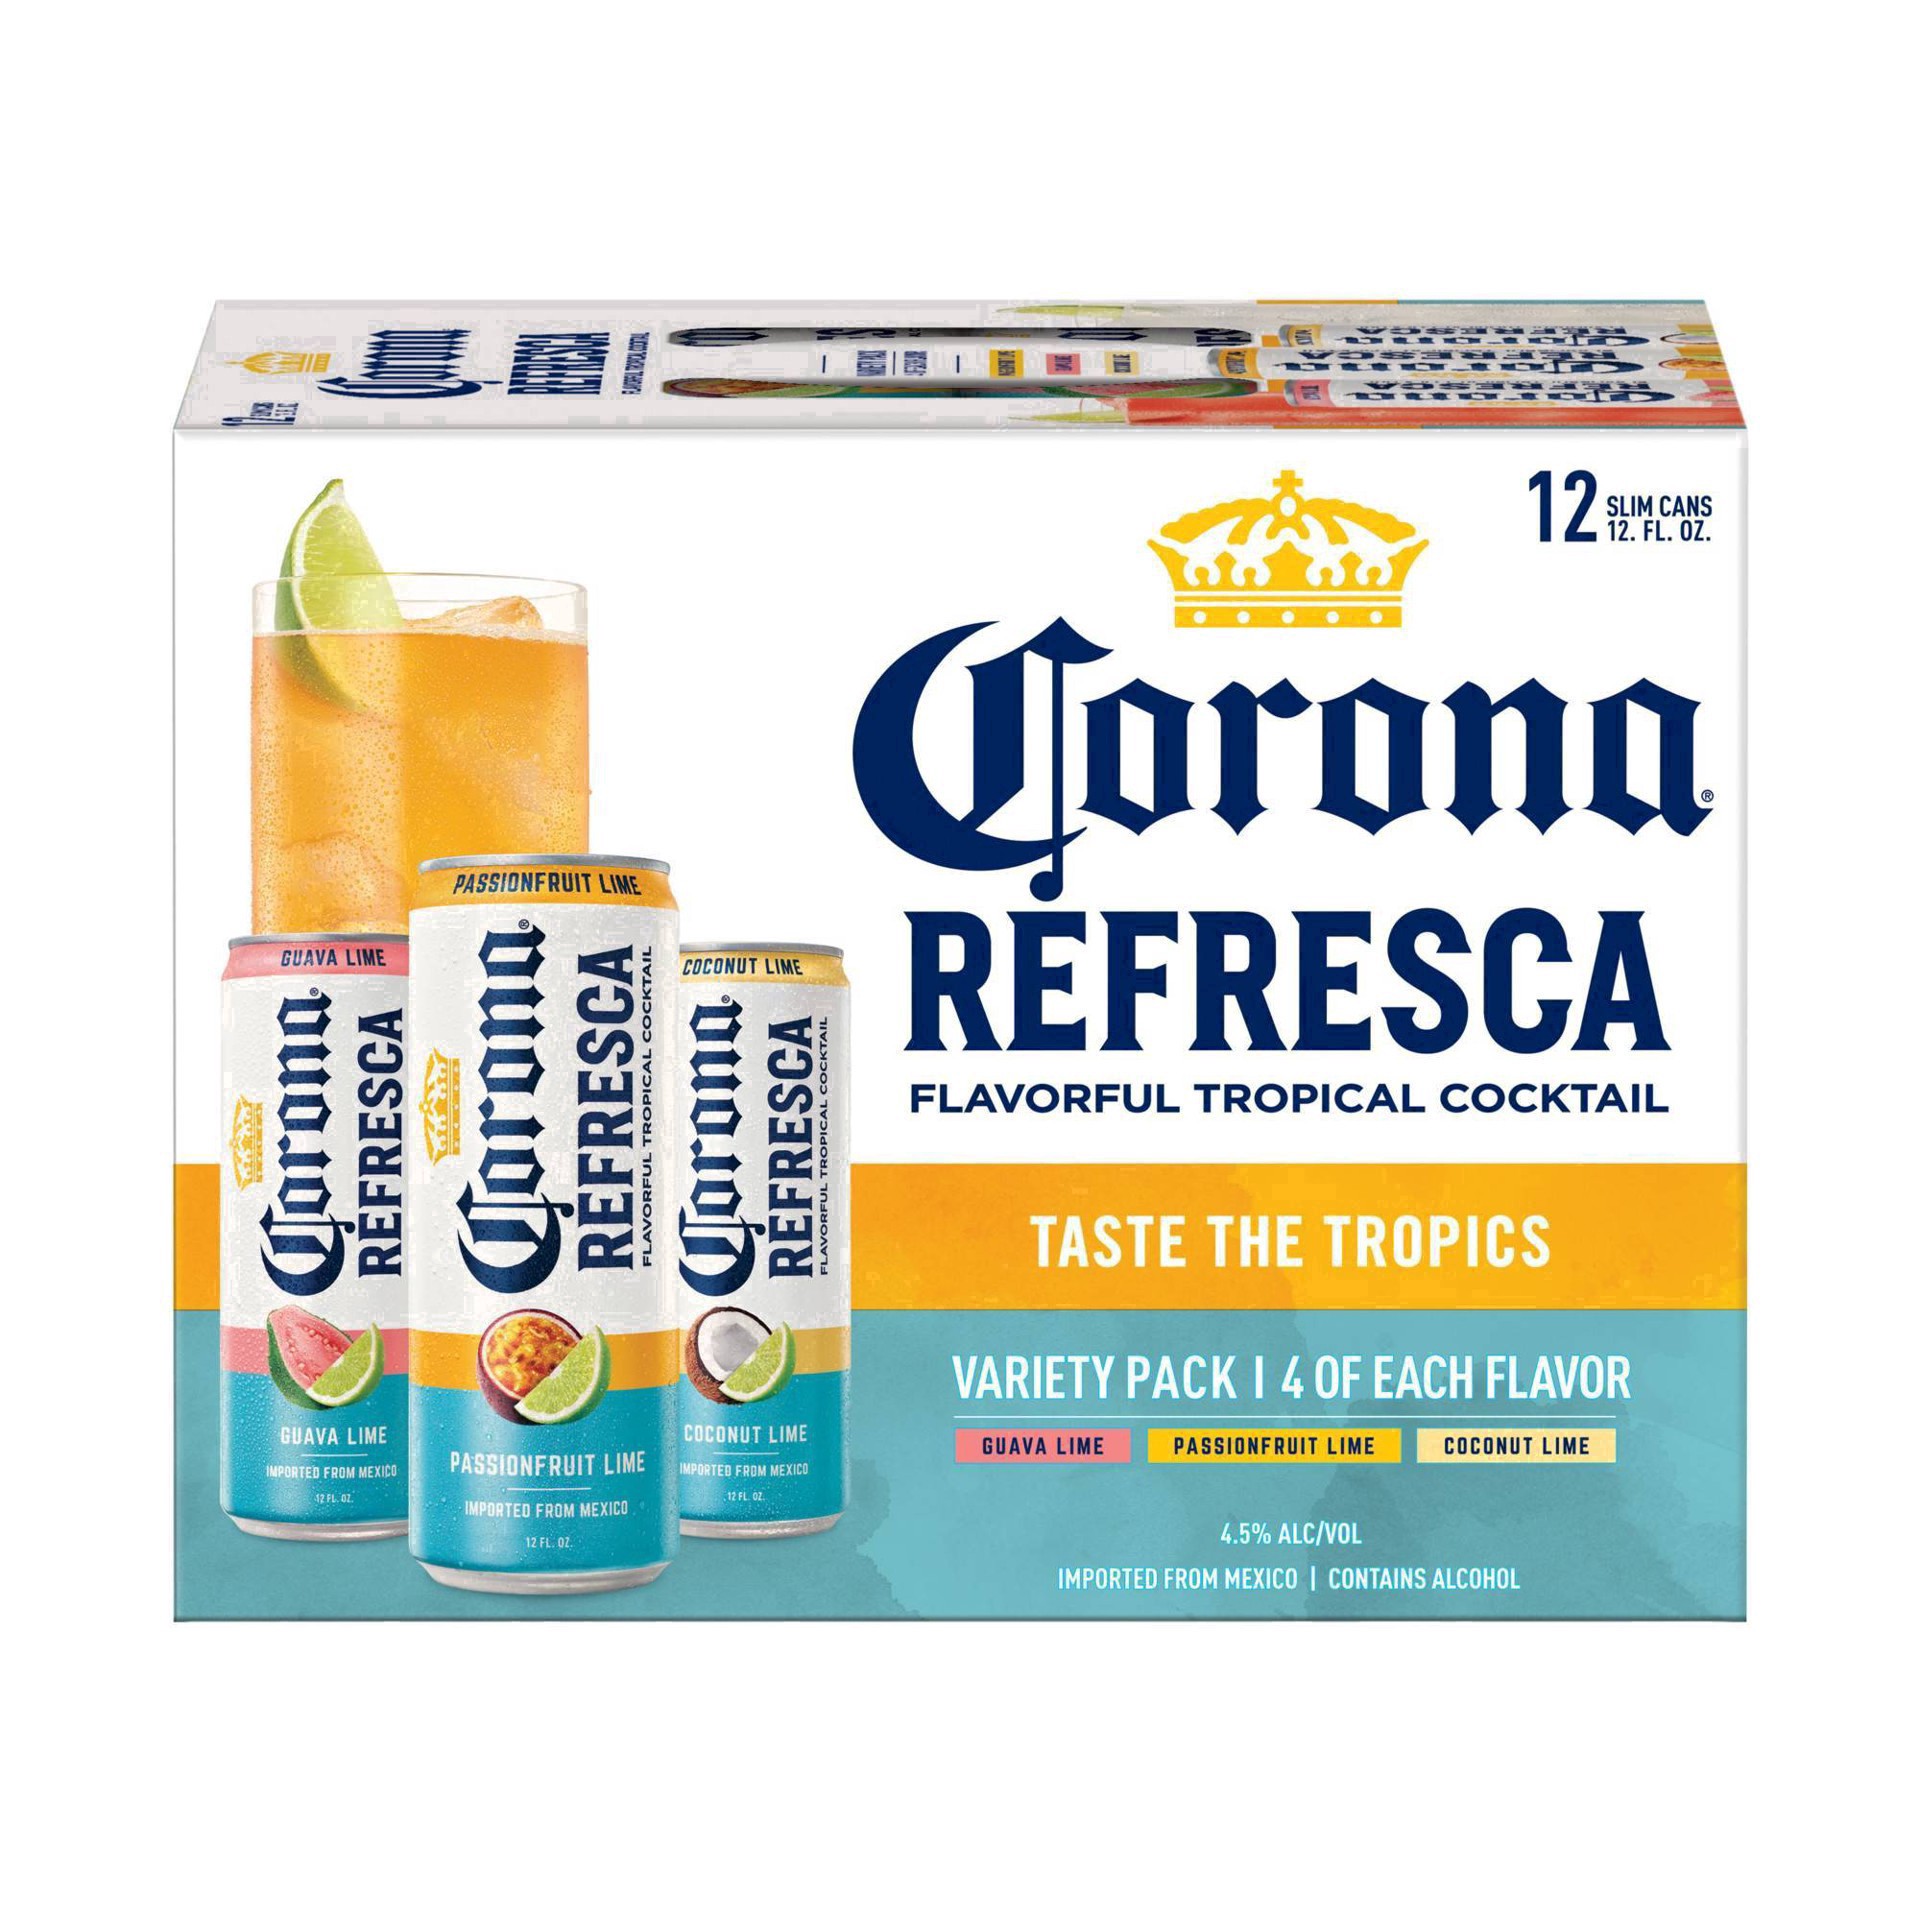 slide 52 of 113, Corona Refresca Hard Tropical Punch Variety Pack Cans, 144 fl oz